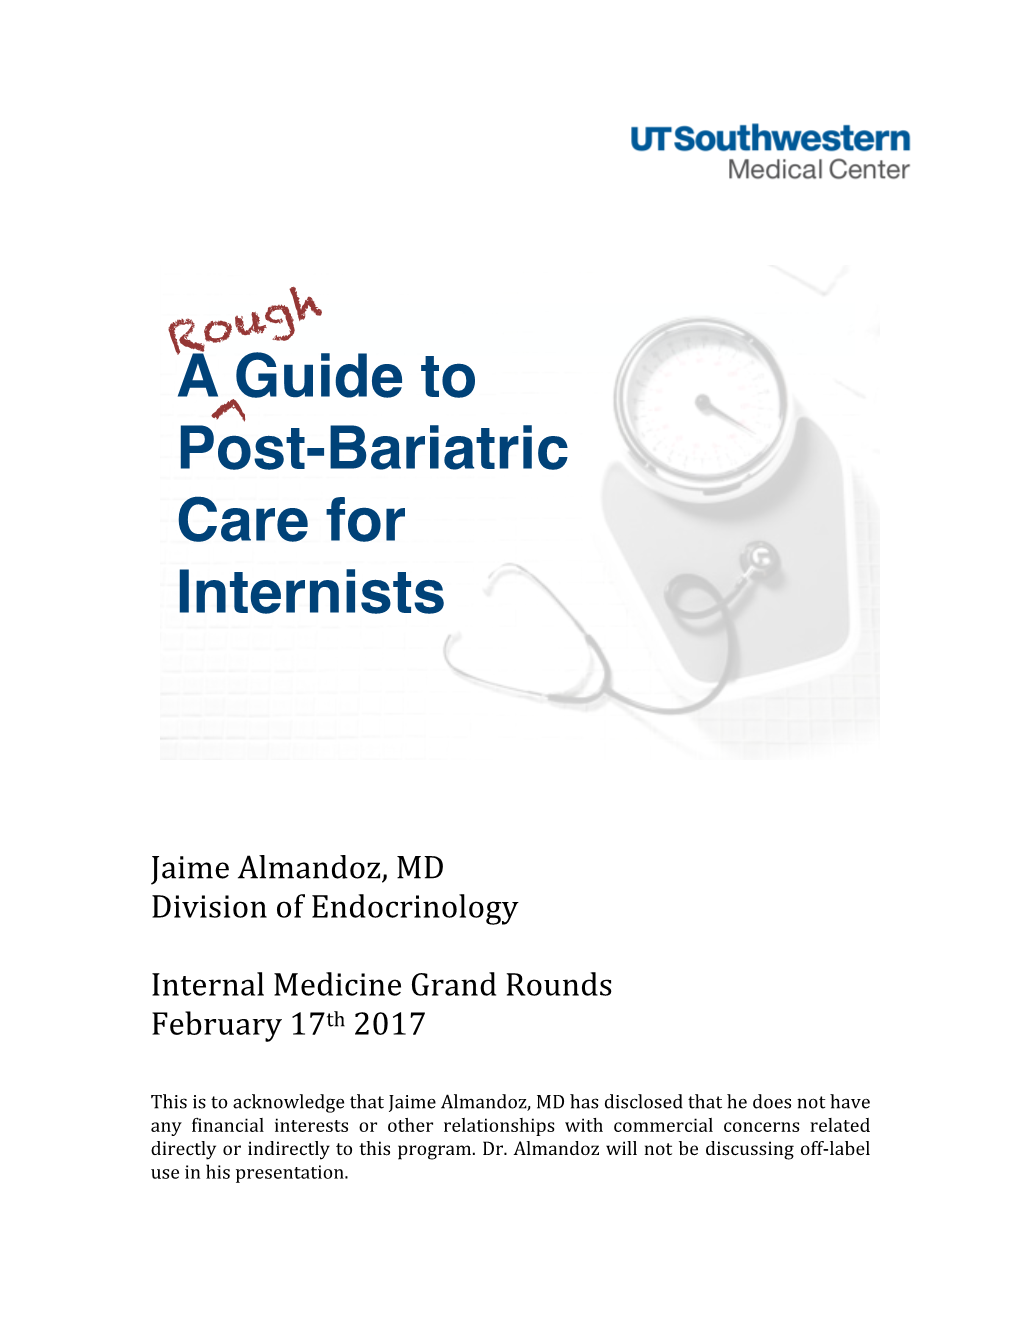 A Guide to Post-Bariatric Care for Internist